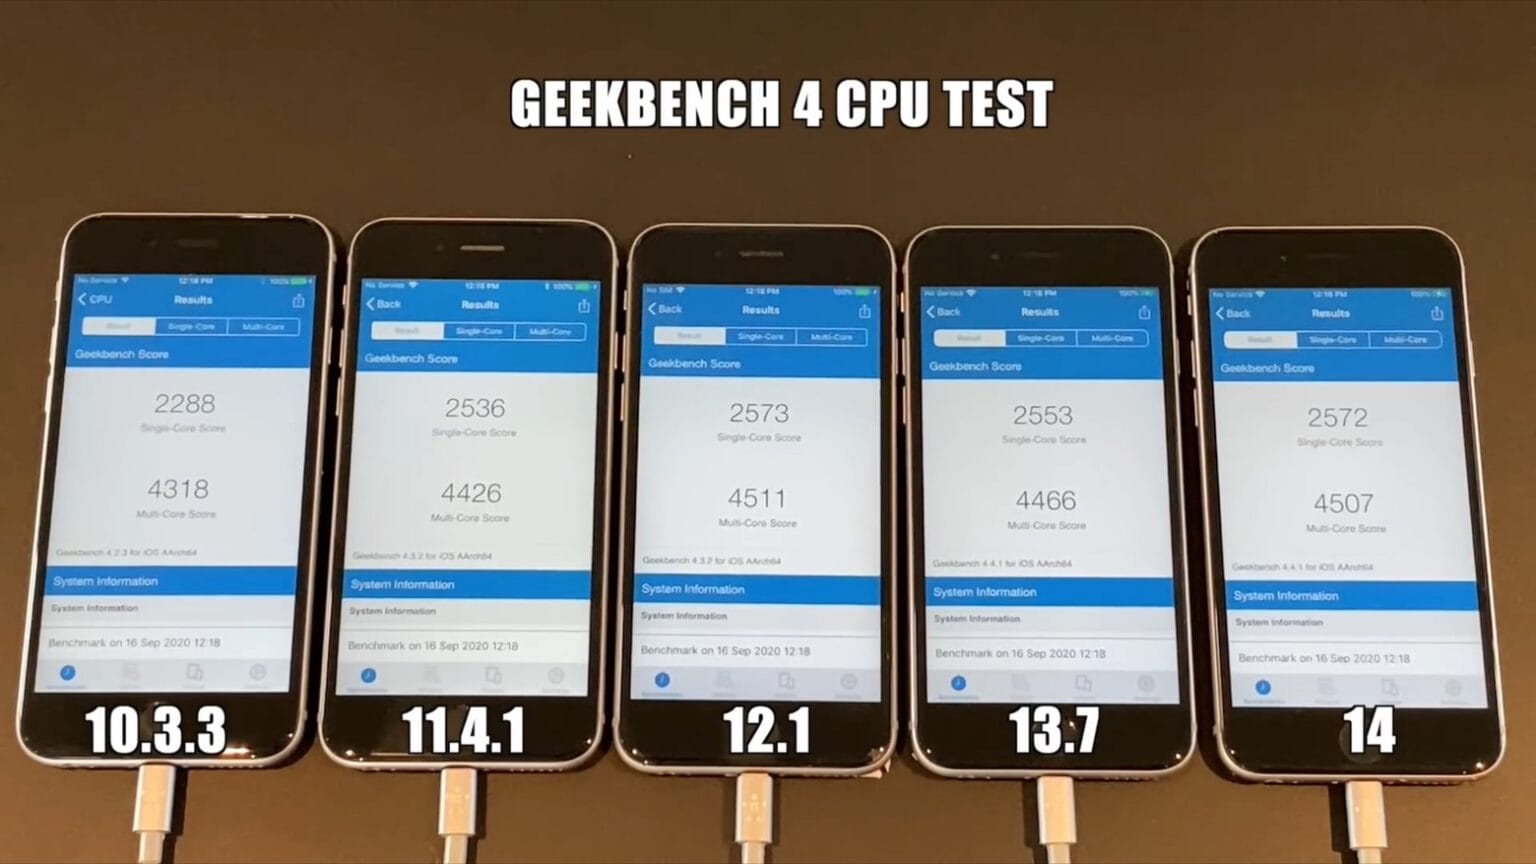 iOS 14 benchmarks compared with older versions back to 10.3.3.